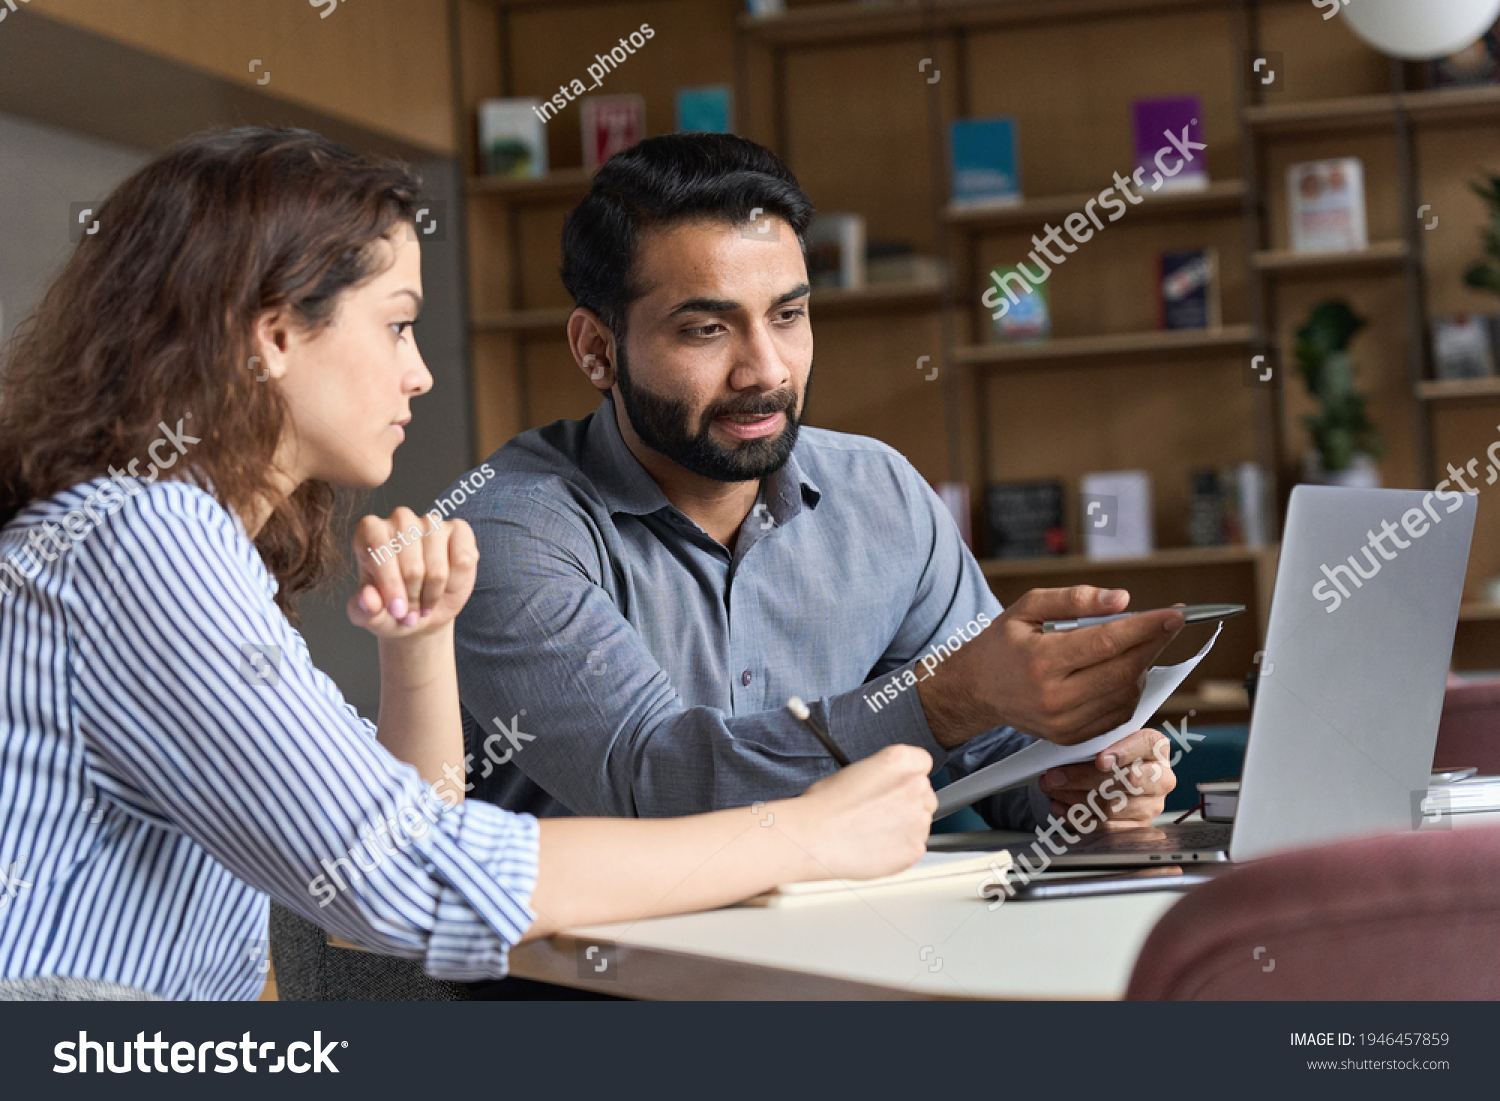 Professional indian teacher, executive or mentor helping latin student, new employee, teaching intern, explaining online job using laptop computer, talking, having teamwork discussion in office. #1946457859